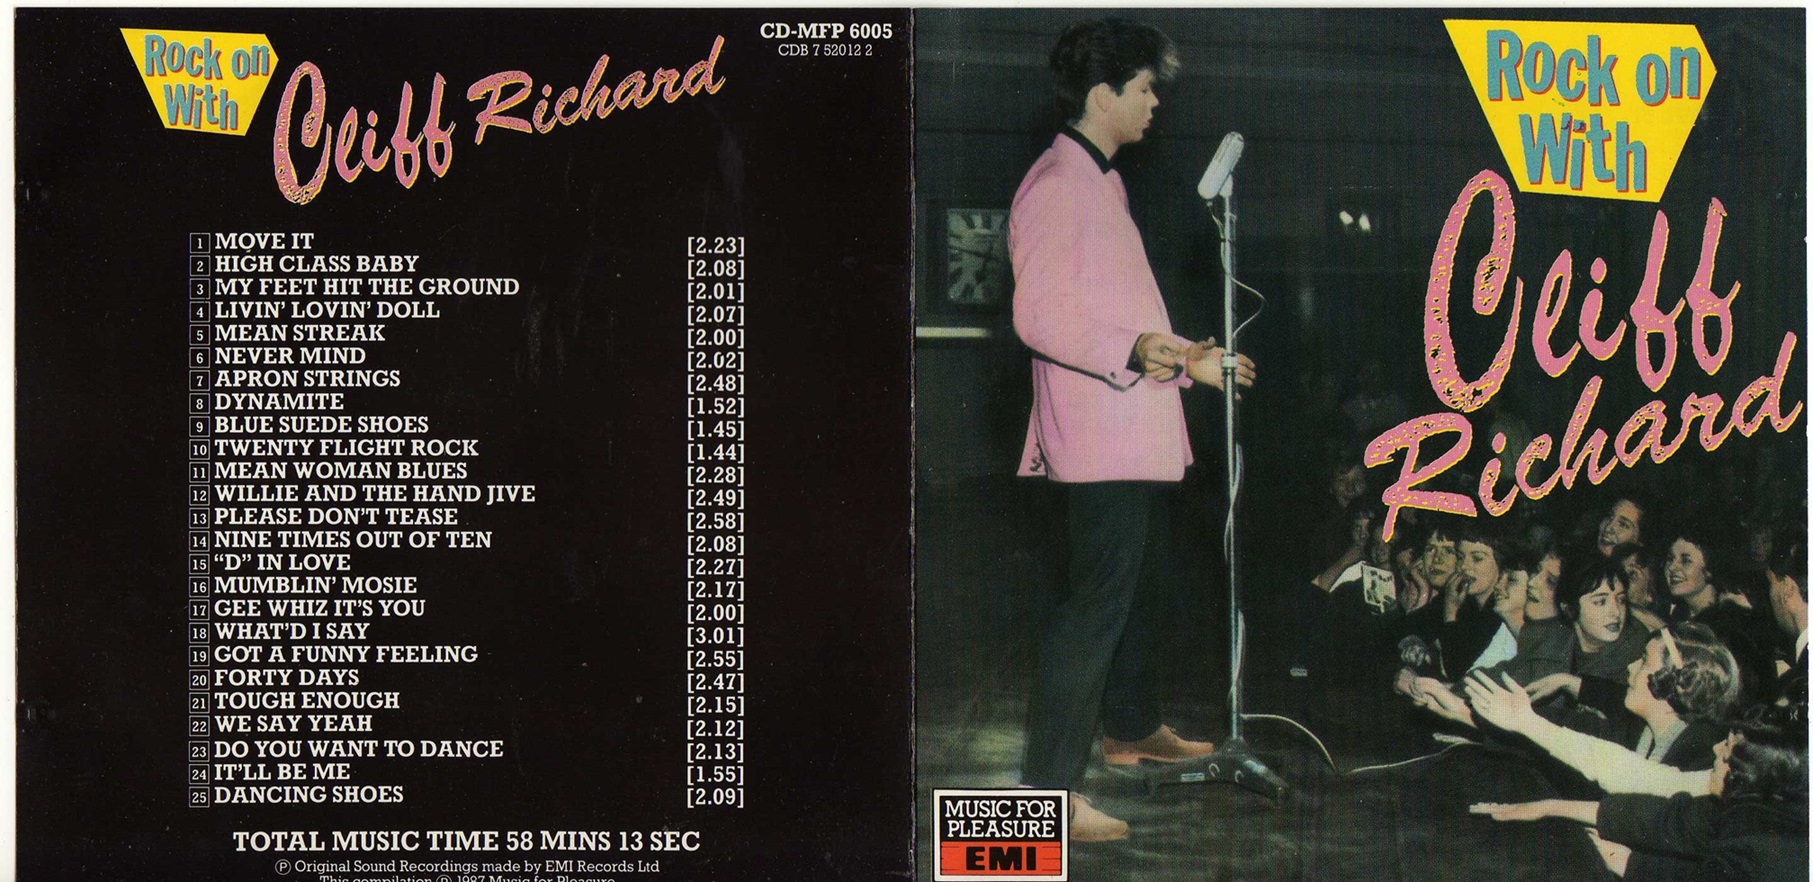 Rock On With - Cliff Richard